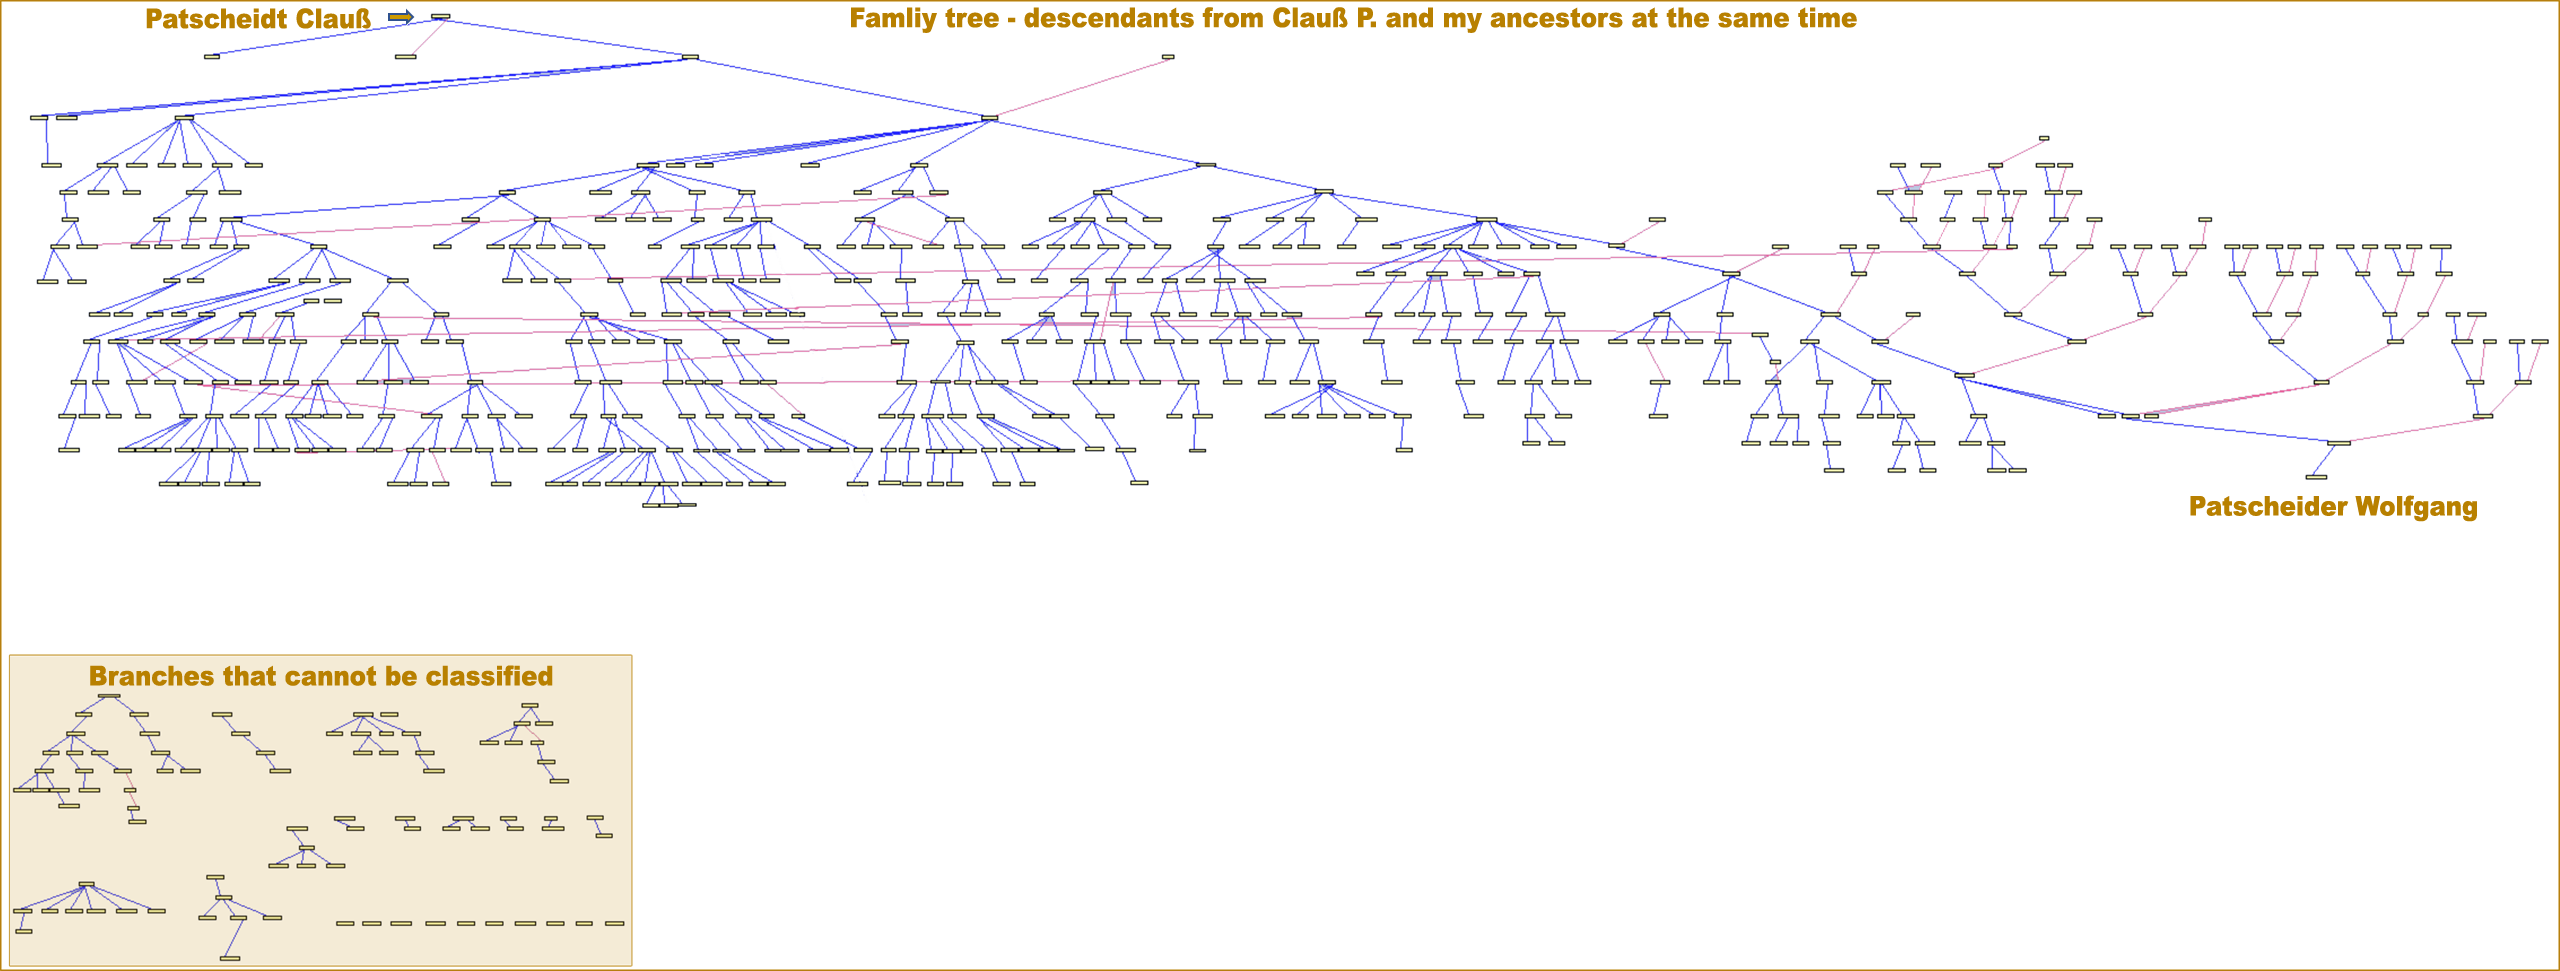 Family tree with descendants of Claus Patscheider and my ancestors